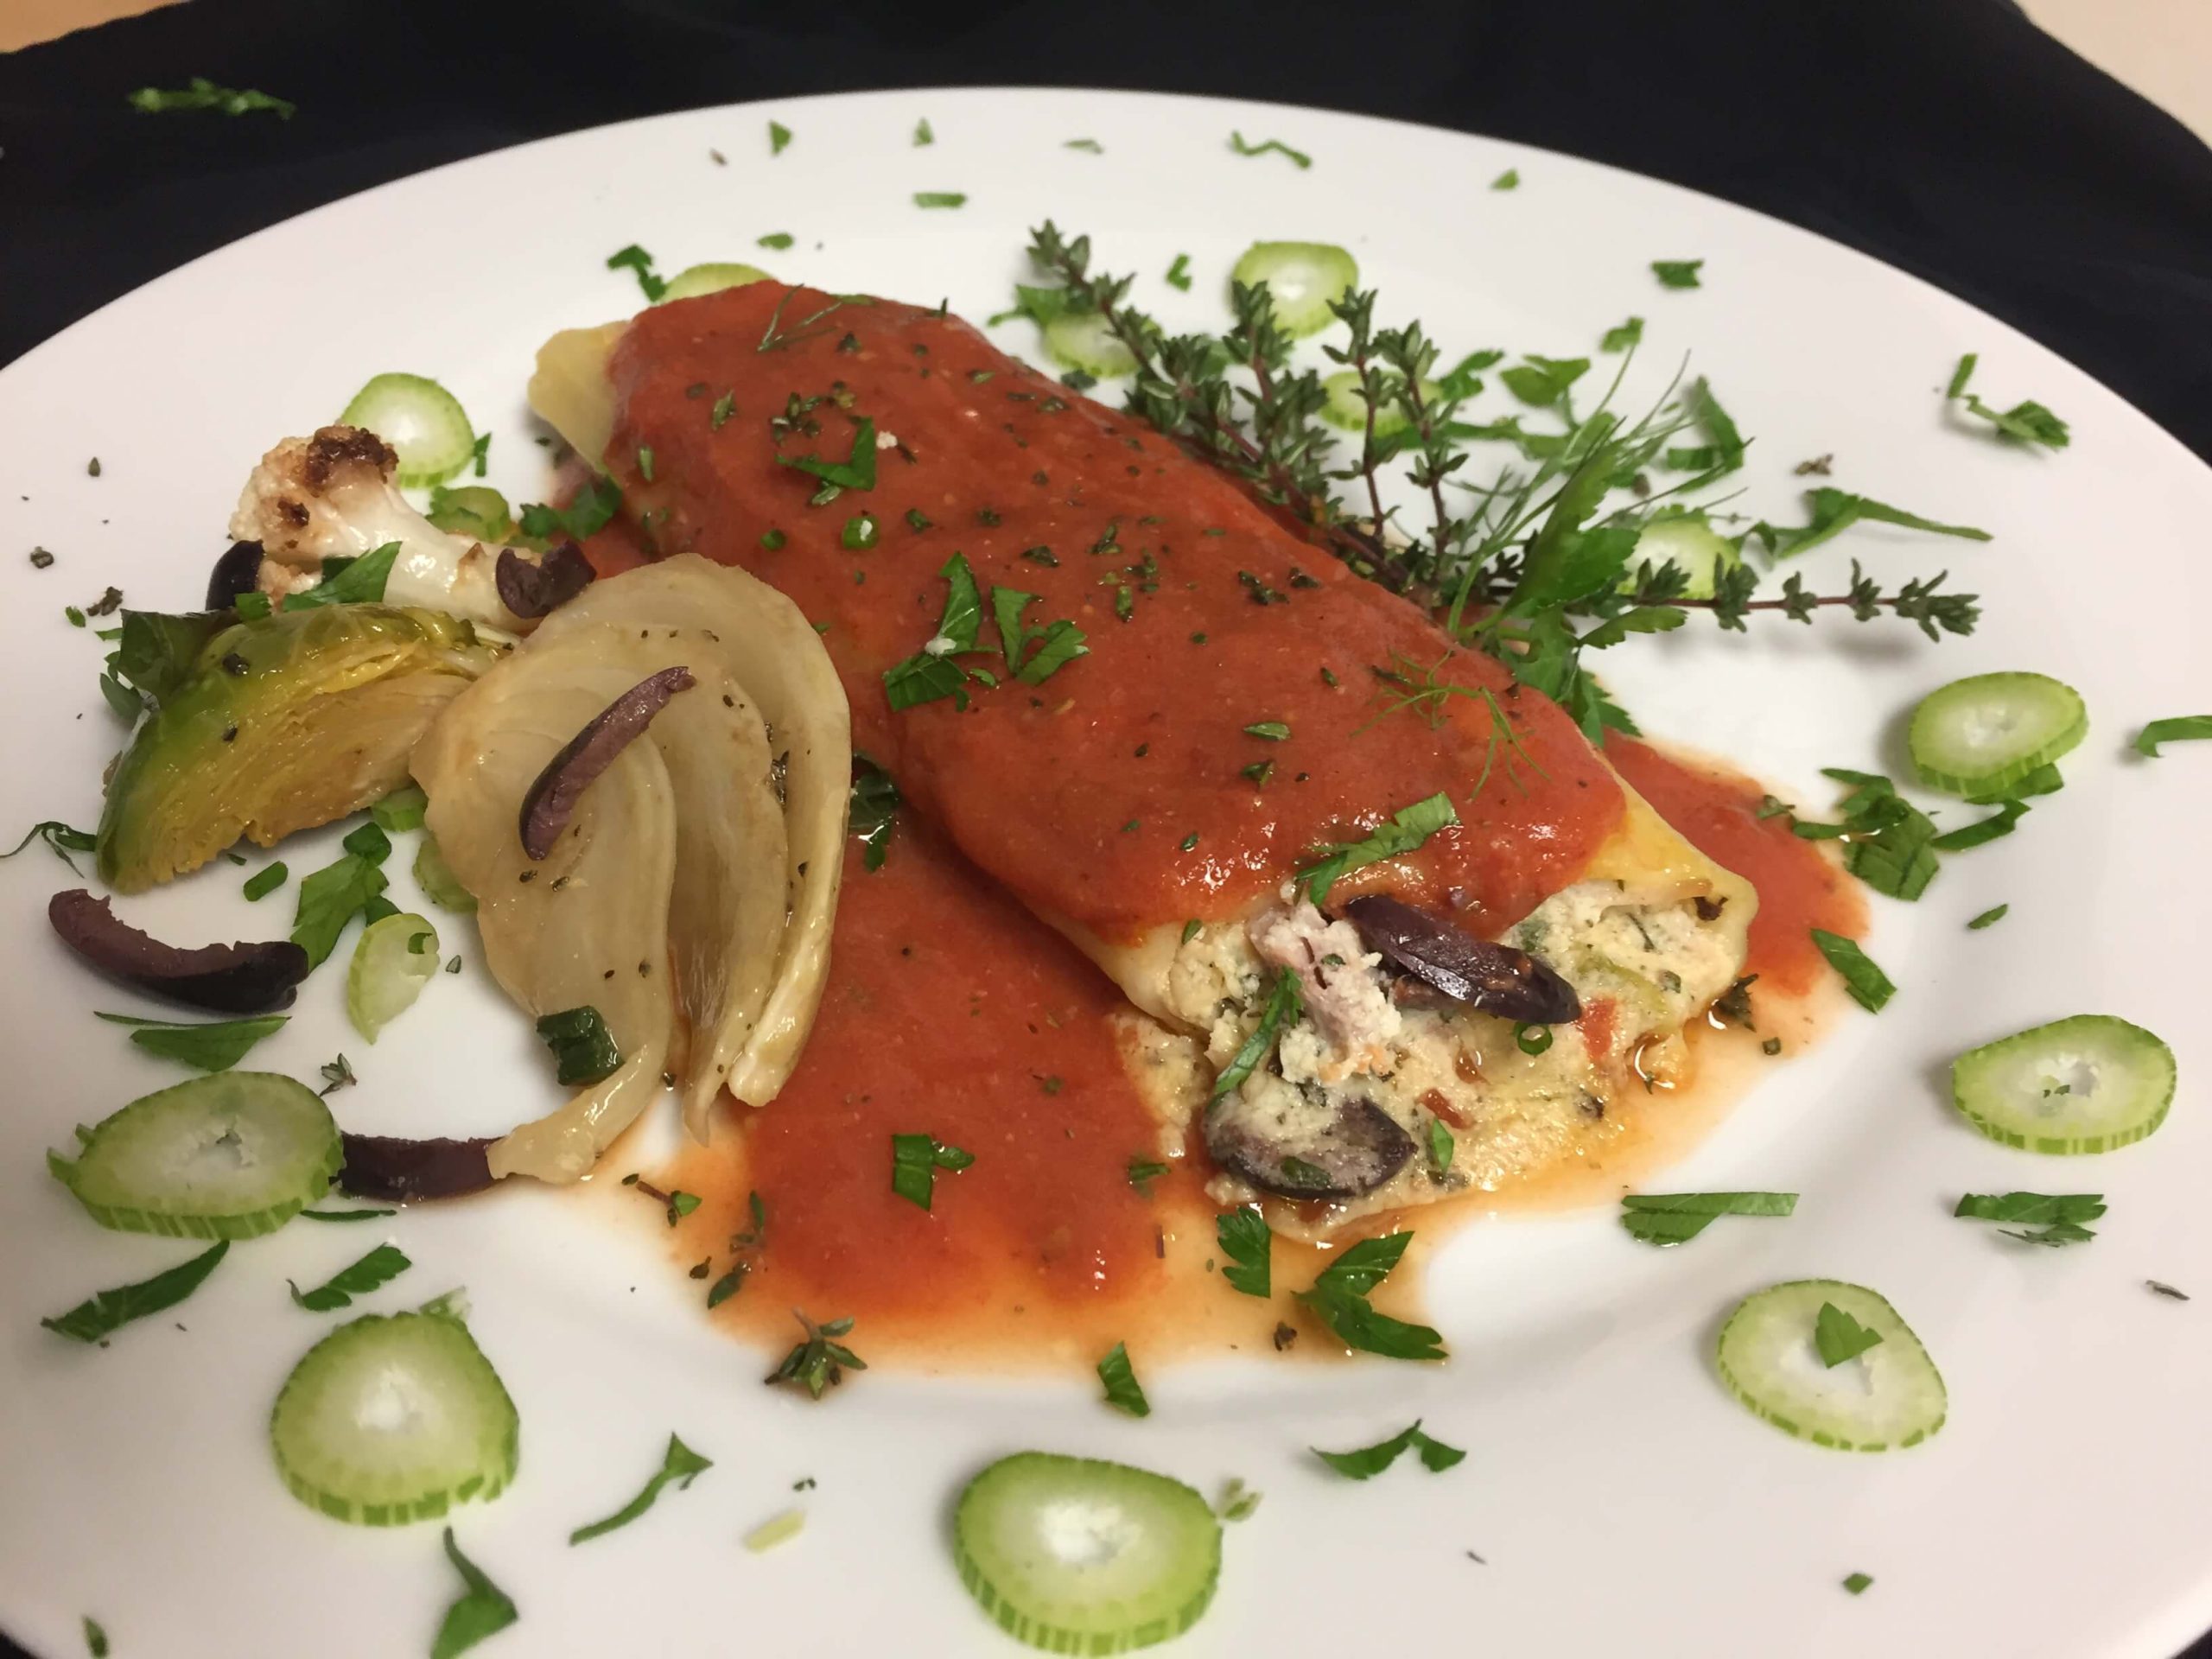 Manicotti with Smoked Chicken, Chevre, Fennel and Olives